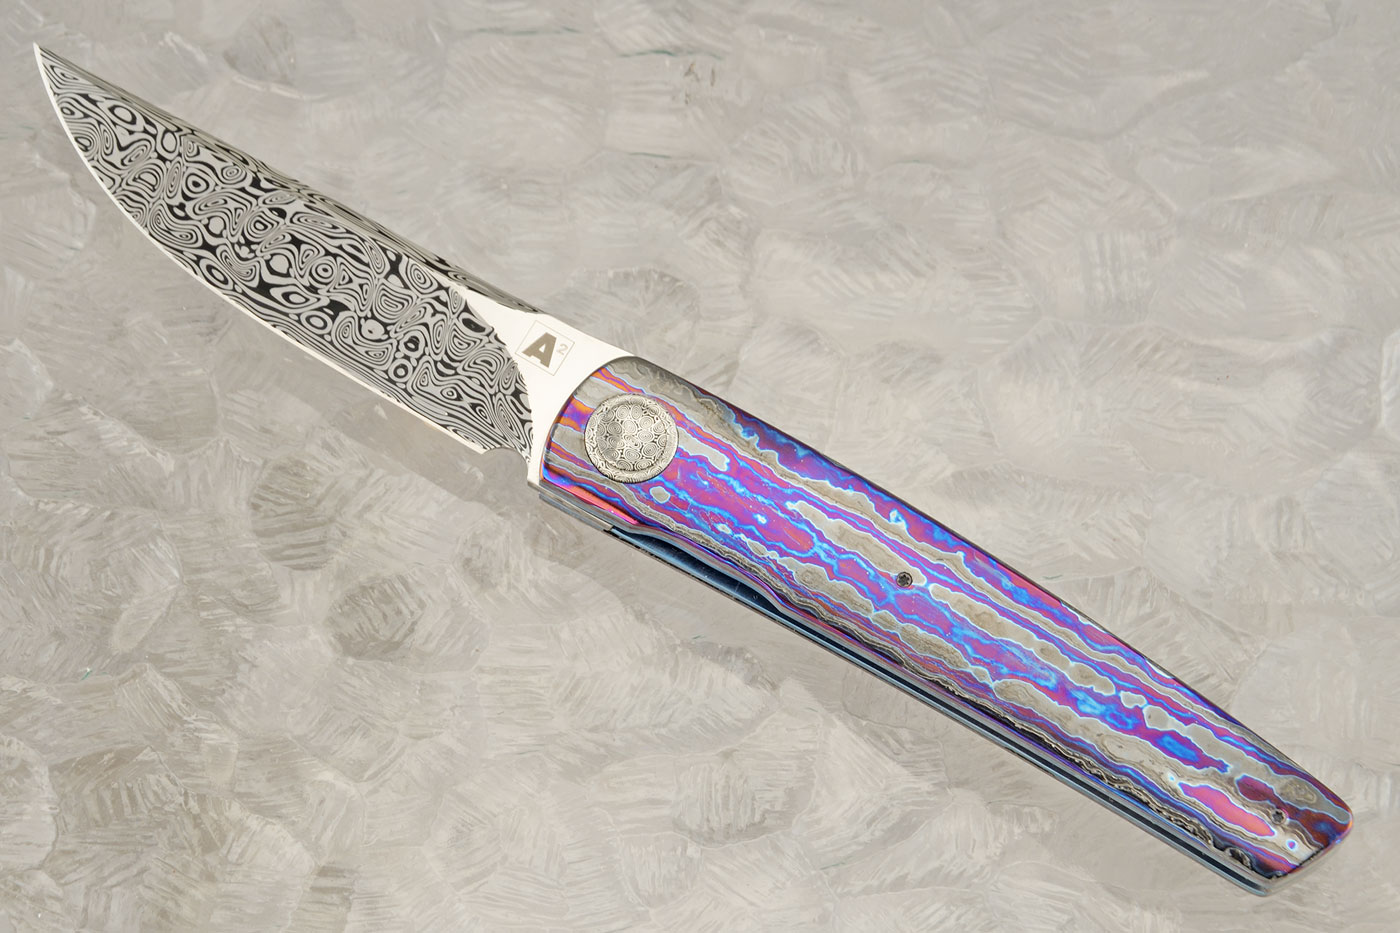 A10 Dress Front Flipper with Damasteel and Black Timascus (Ceramic IKBS)